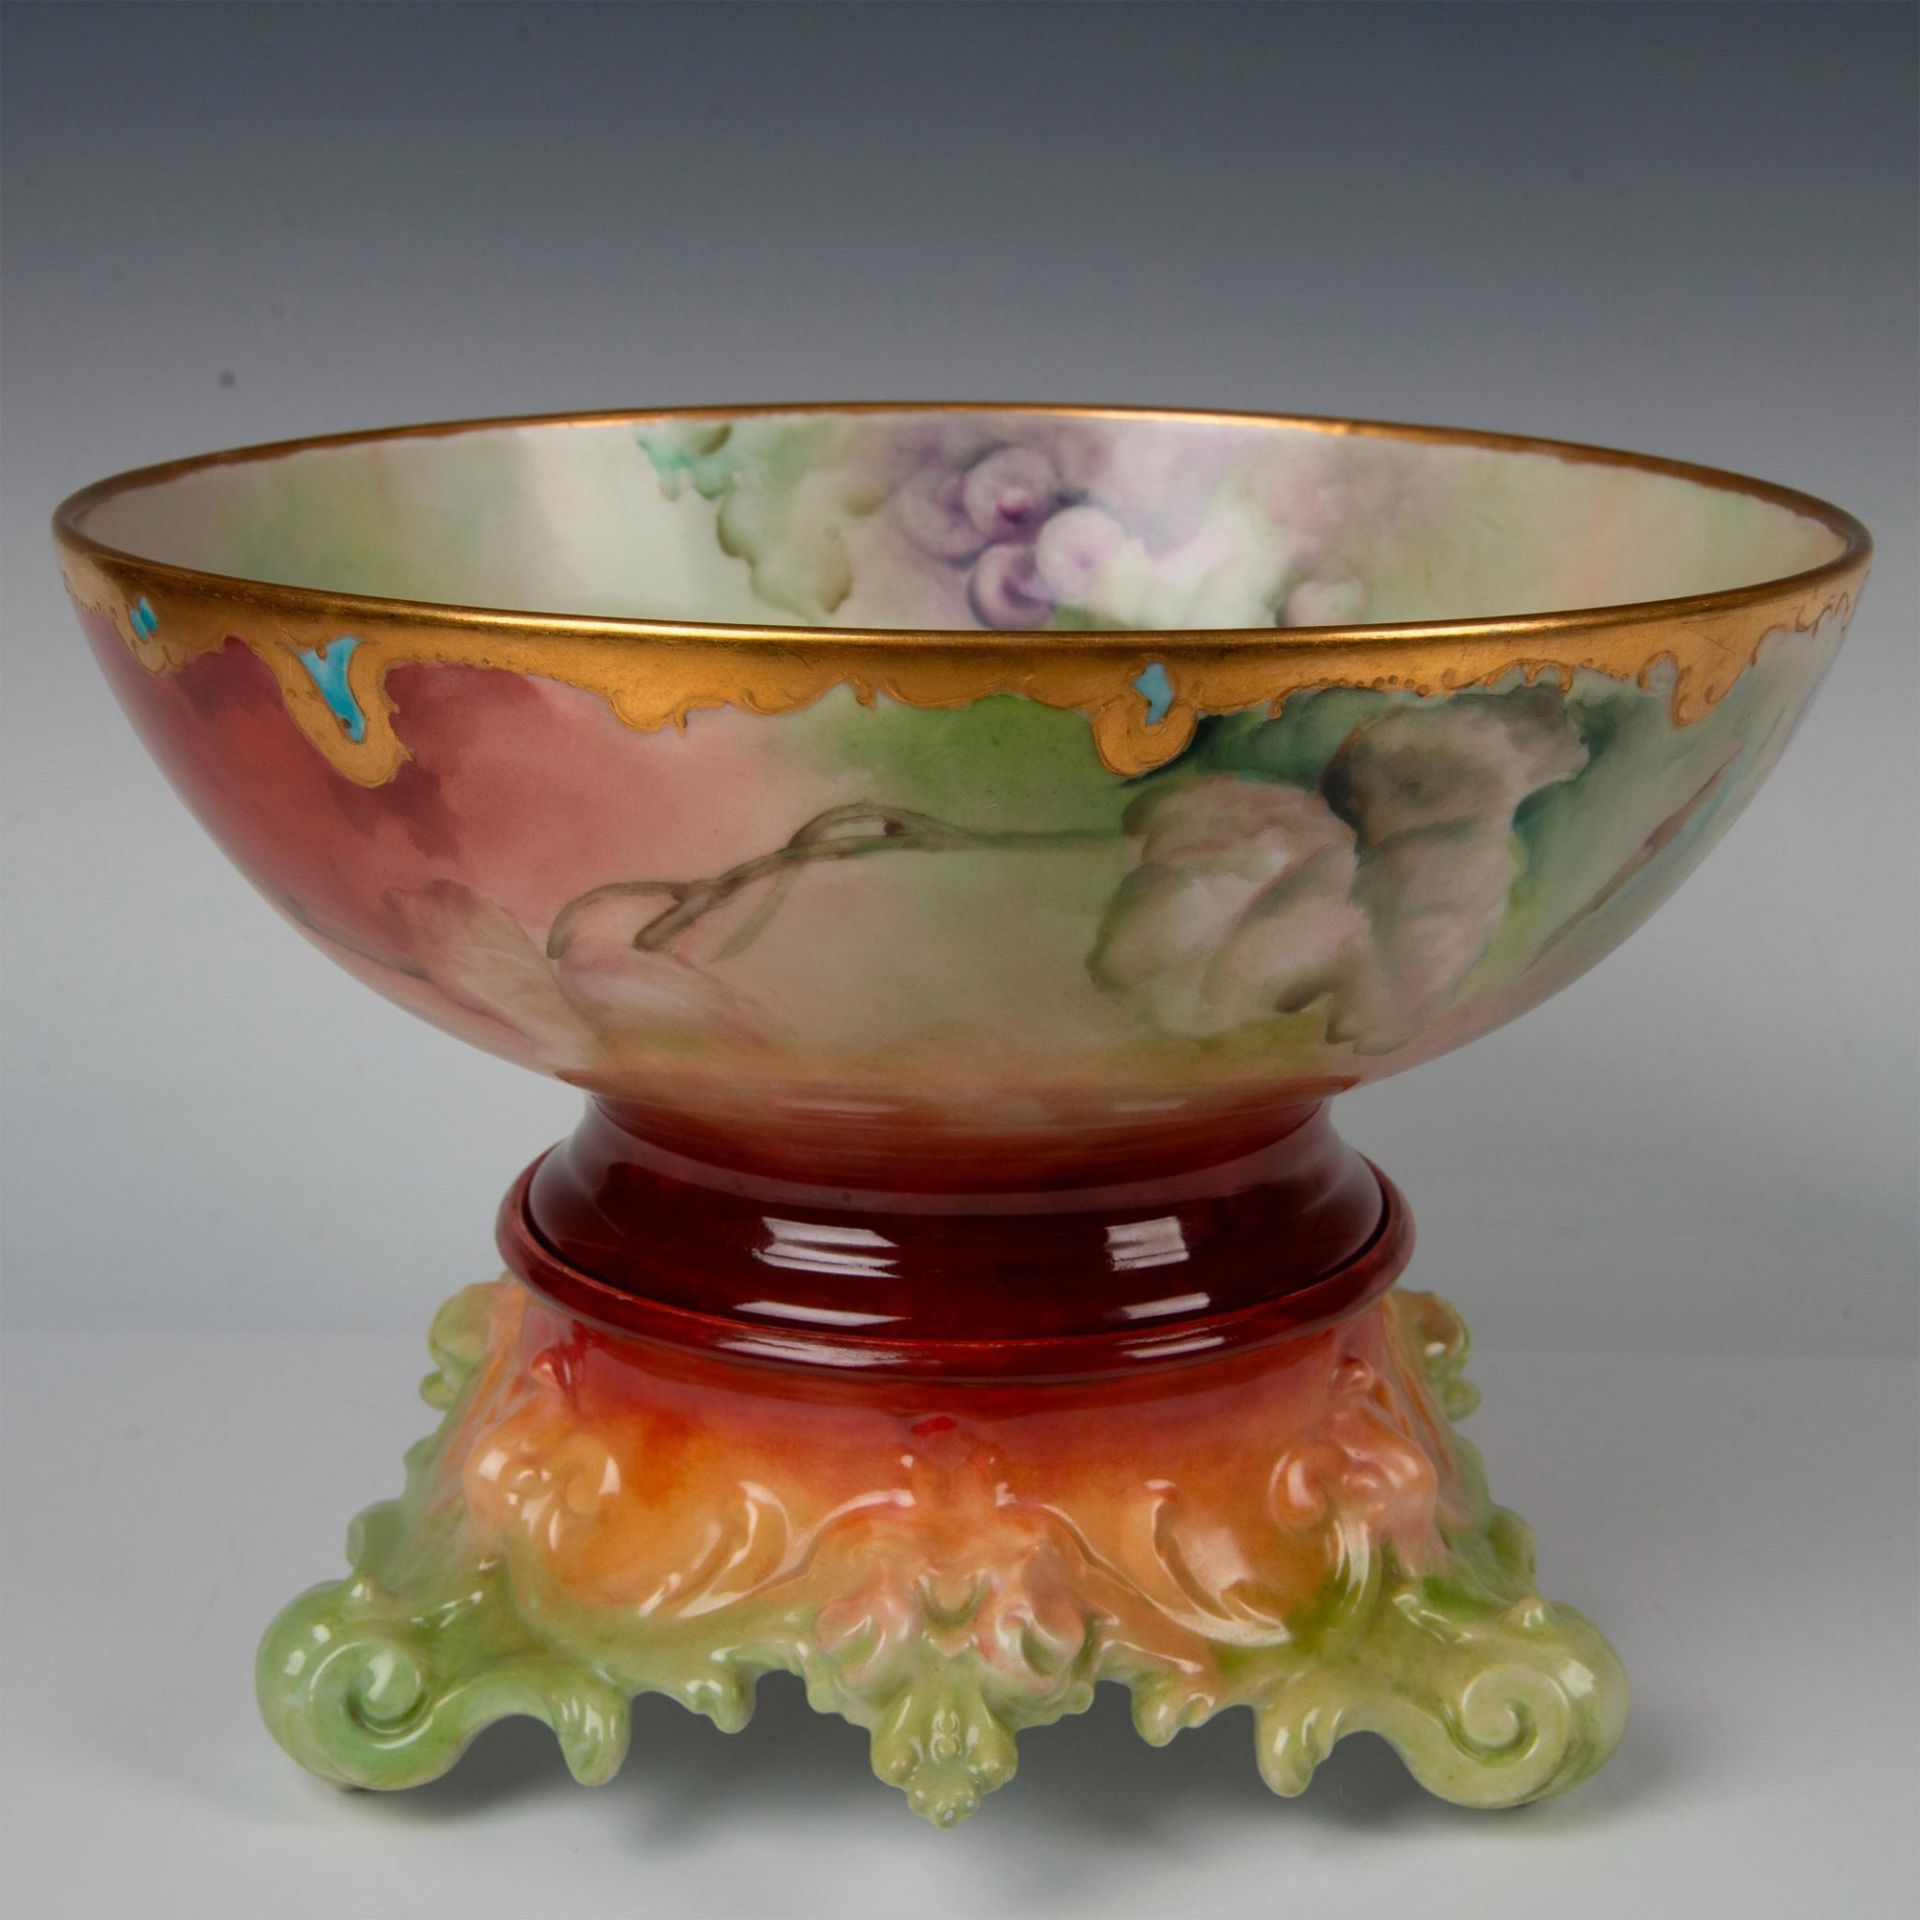 2pc Tressemanes & Vogt Limoges Hand Painted Punch Bowl with Stand - Image 3 of 8